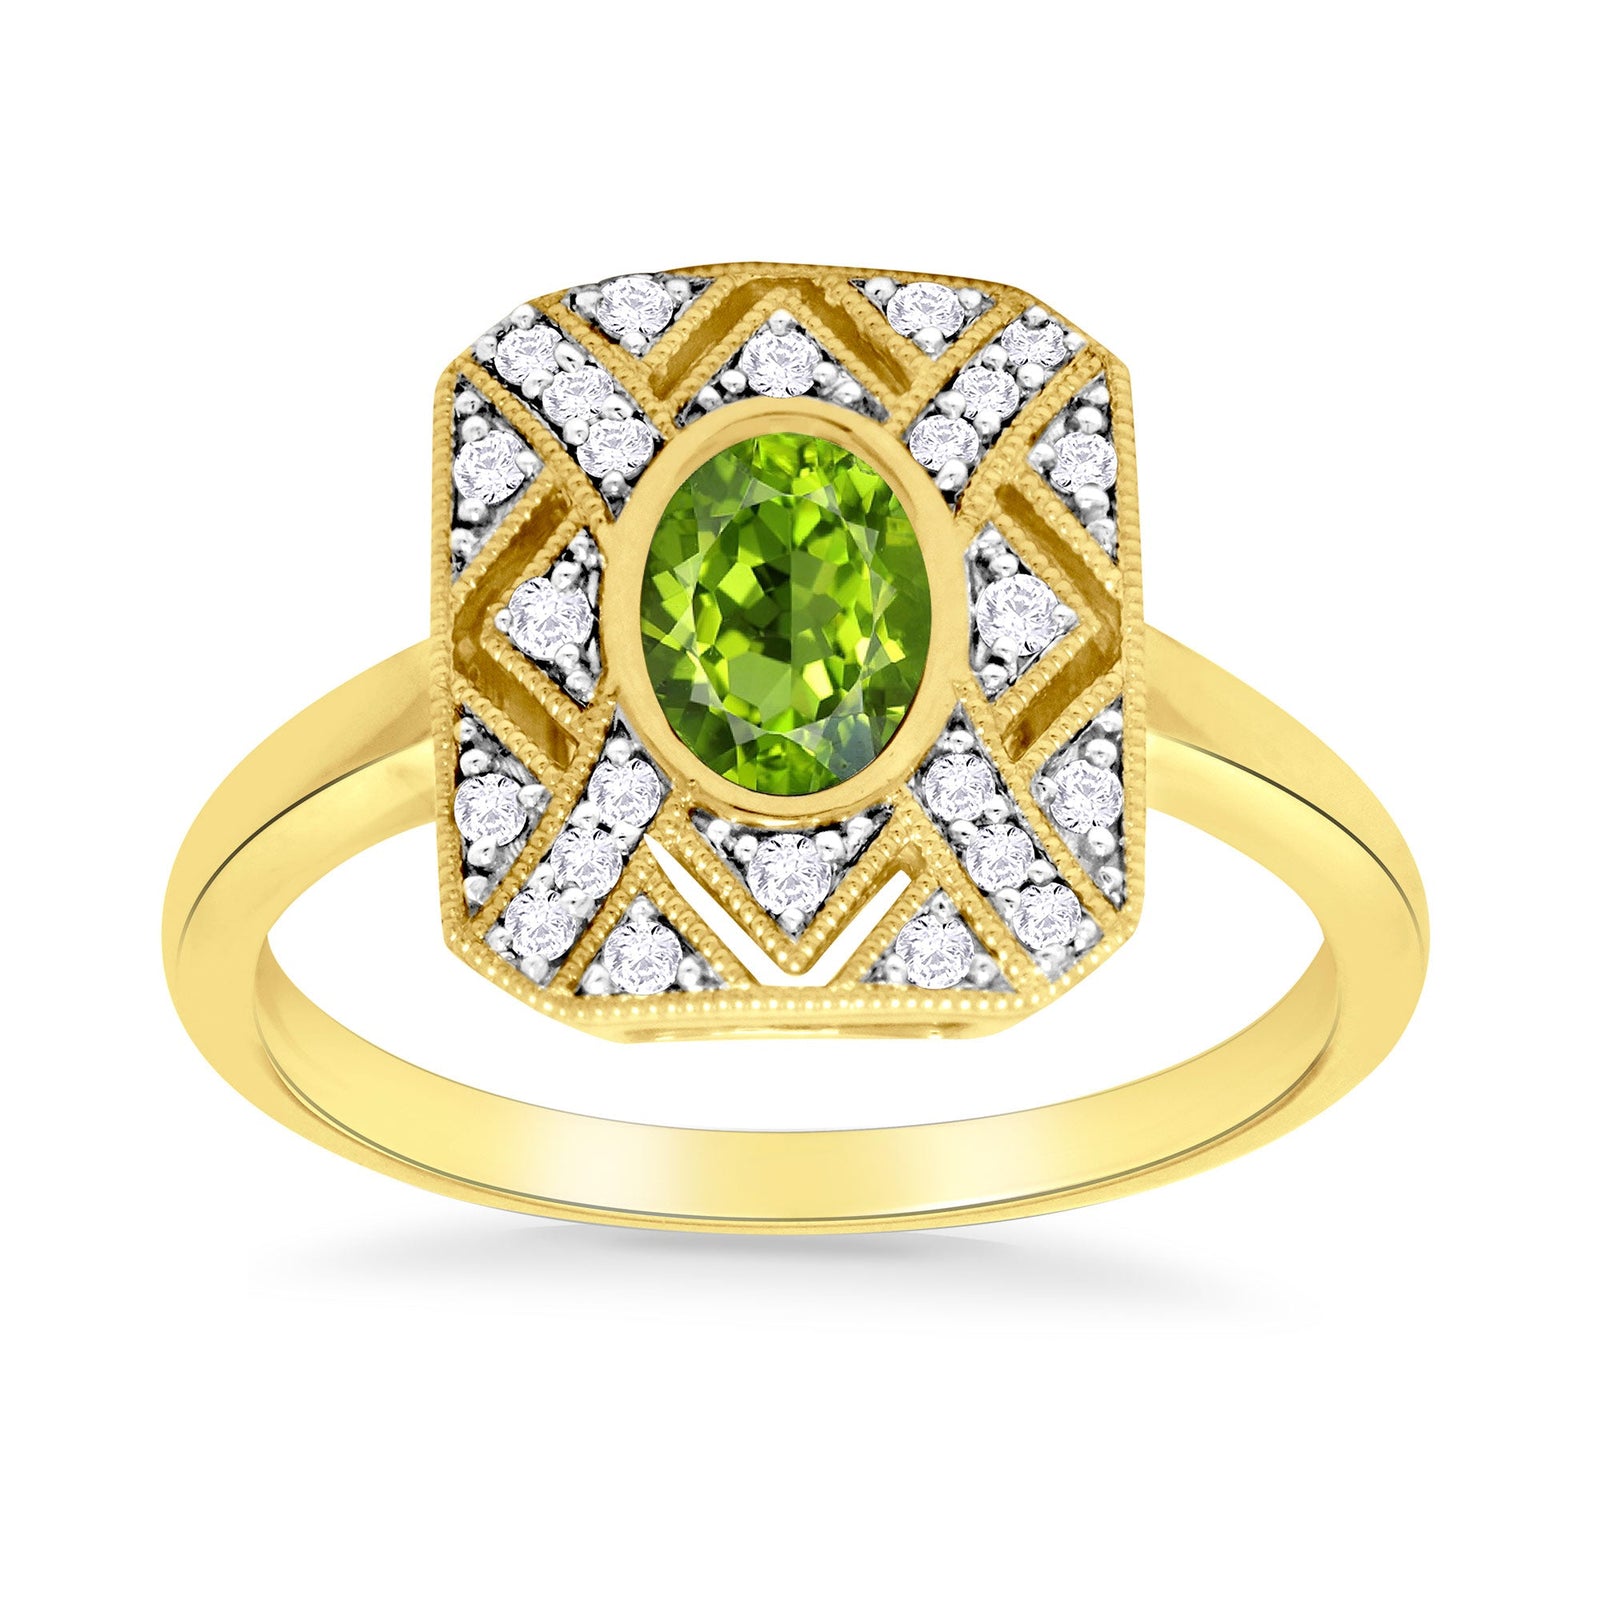 9ct gold 6x4mm oval peridot & antique style diamond cluster ring 0.17ct